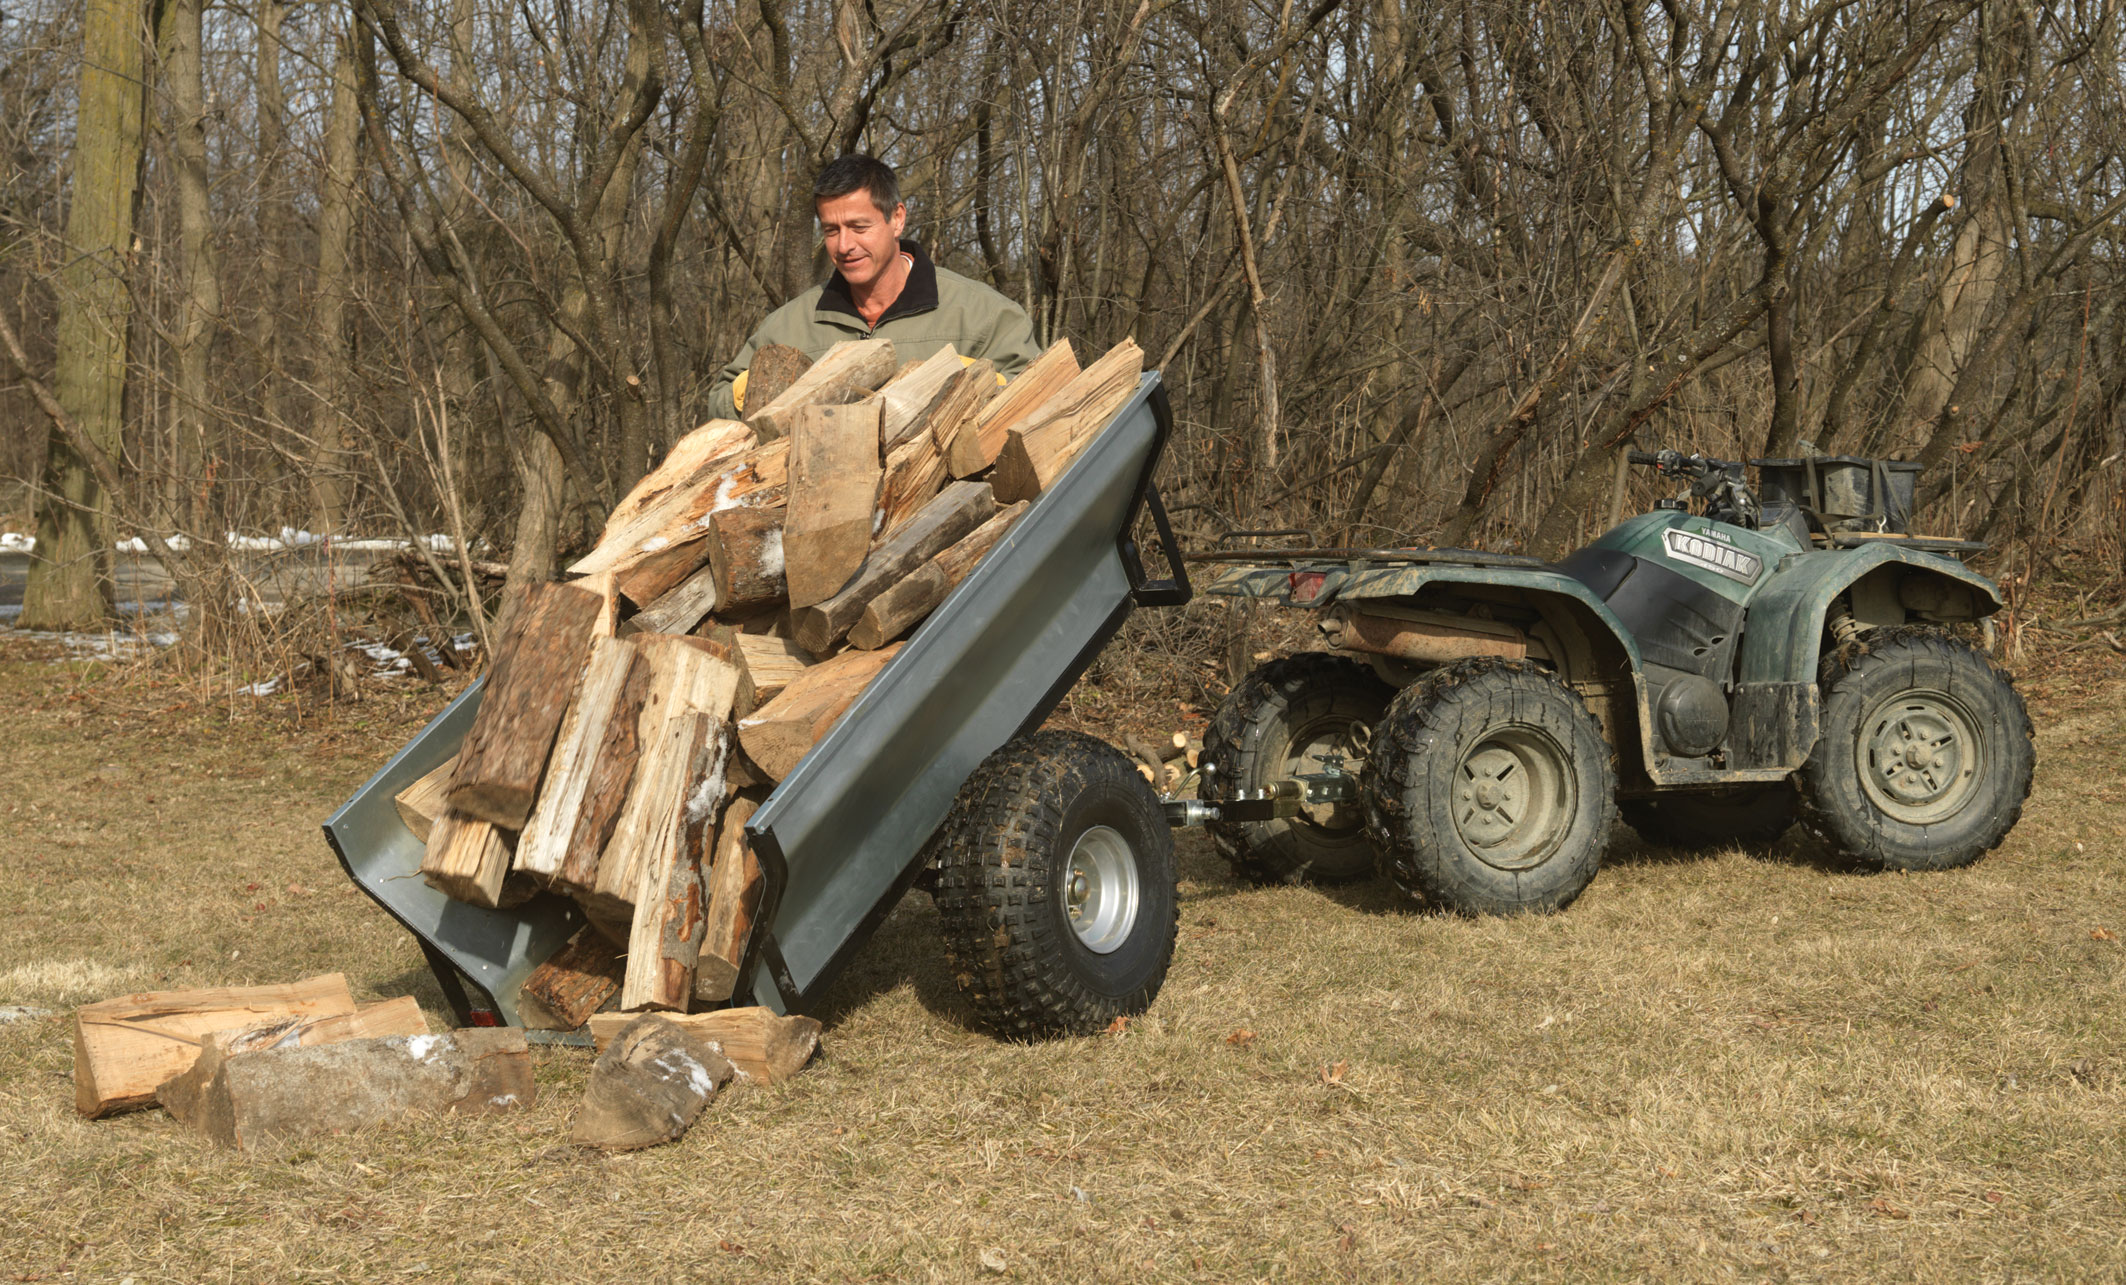 An ATV with a utility trailer being used to transport a load of firewood.